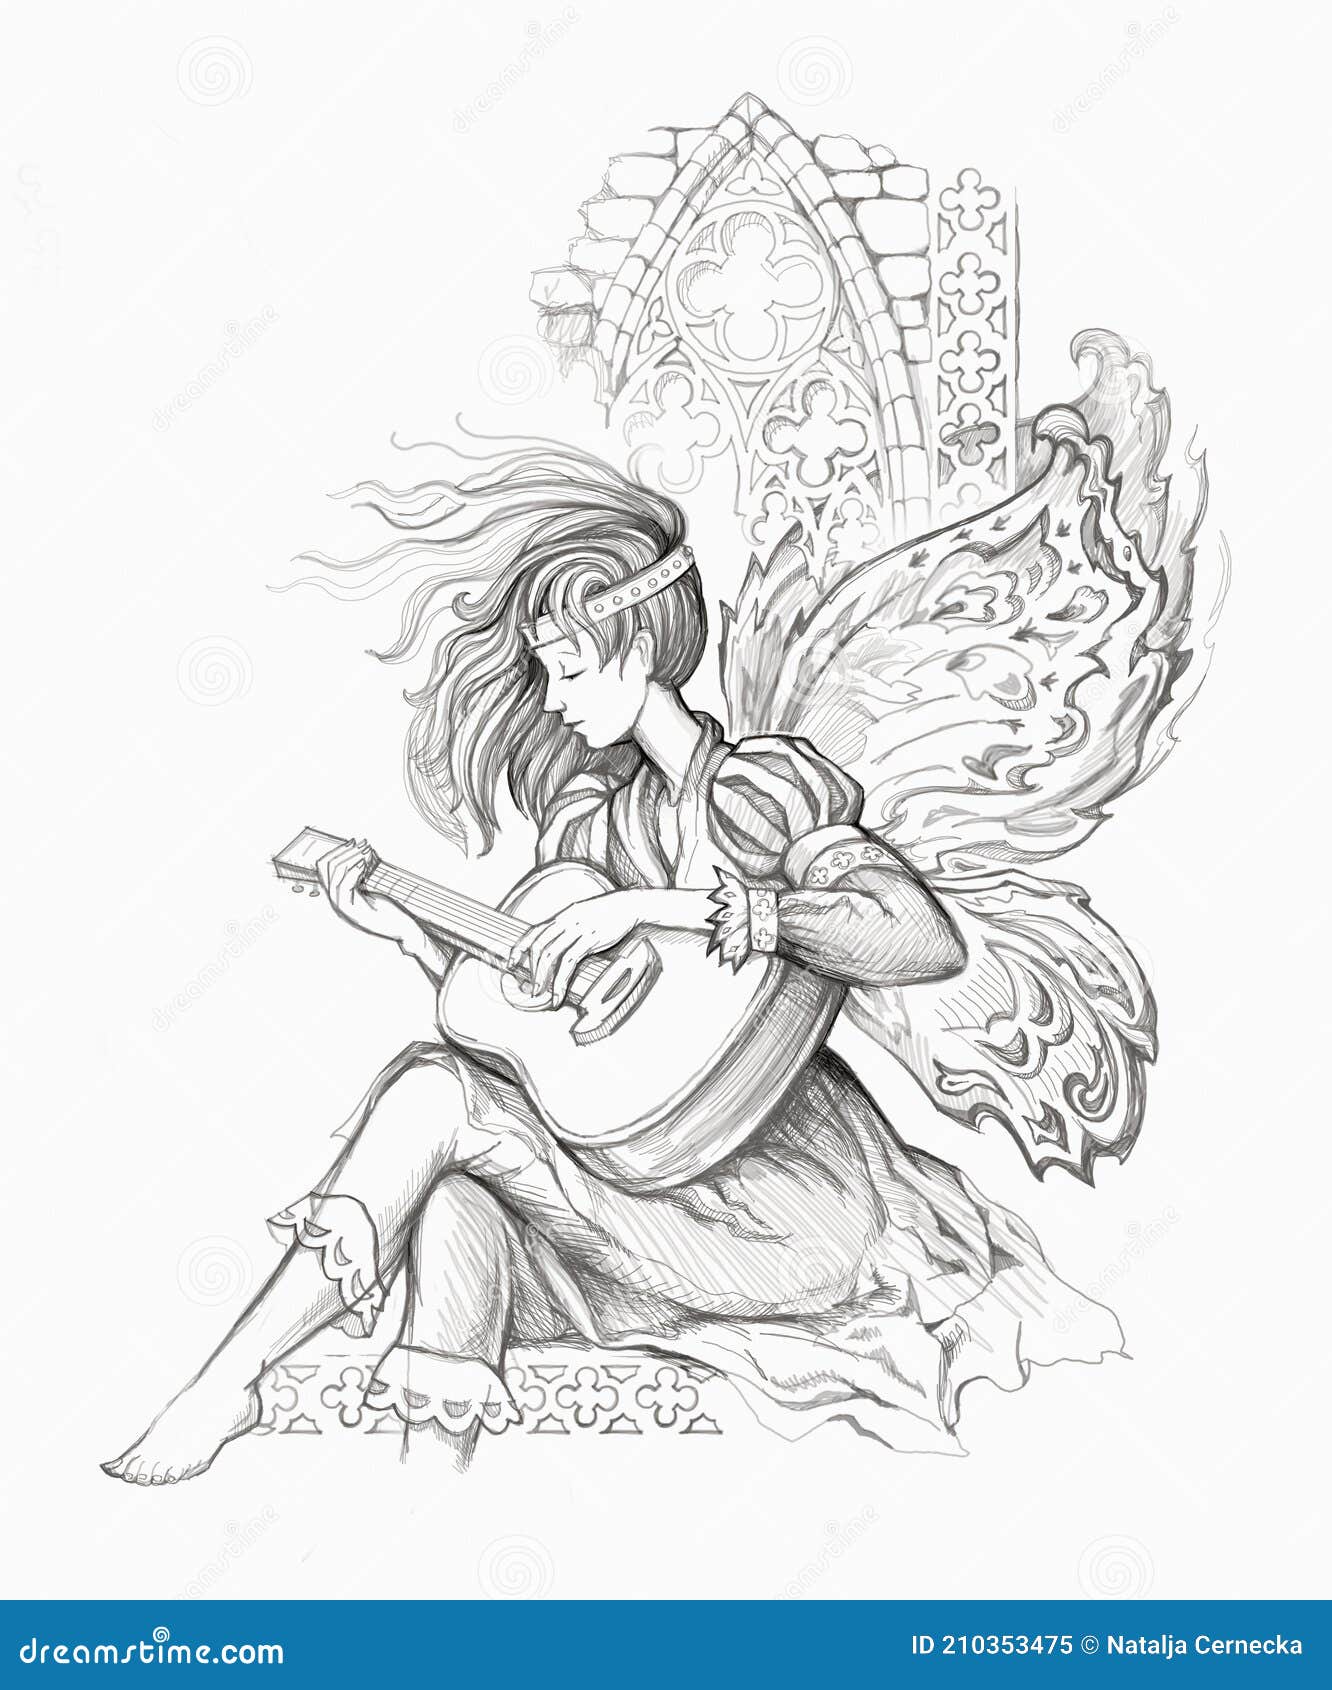 Pencil Drawing Music Stock Illustrations 4 137 Pencil Drawing Music Stock Illustrations Vectors Clipart Dreamstime Learn draw music notes, notes, musical instruments, free. dreamstime com